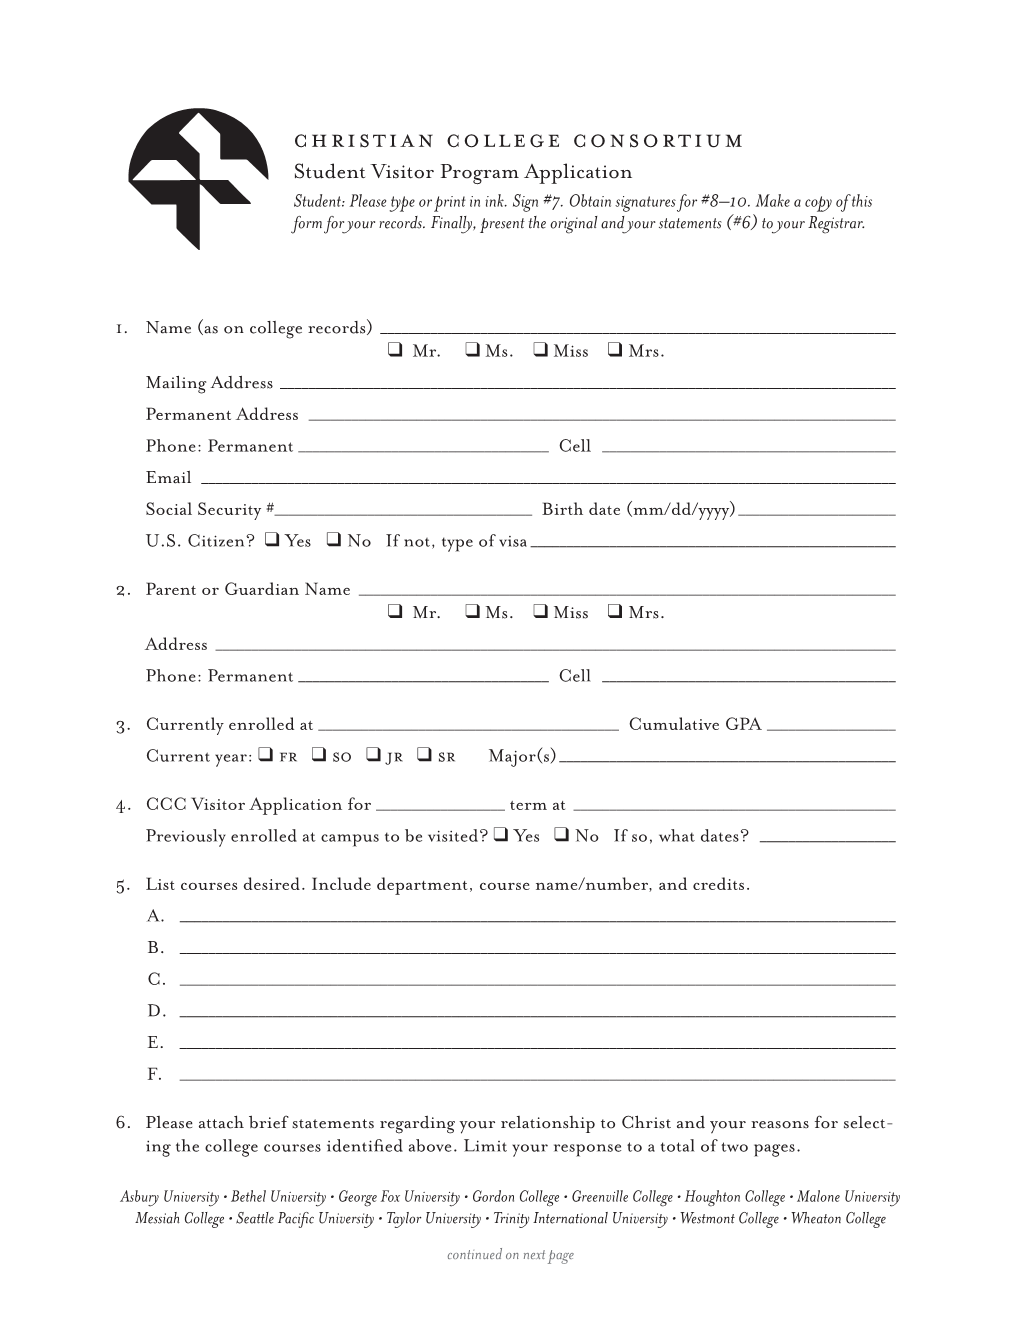 Student Visitor Program Application Student: Please Type Or Print in Ink